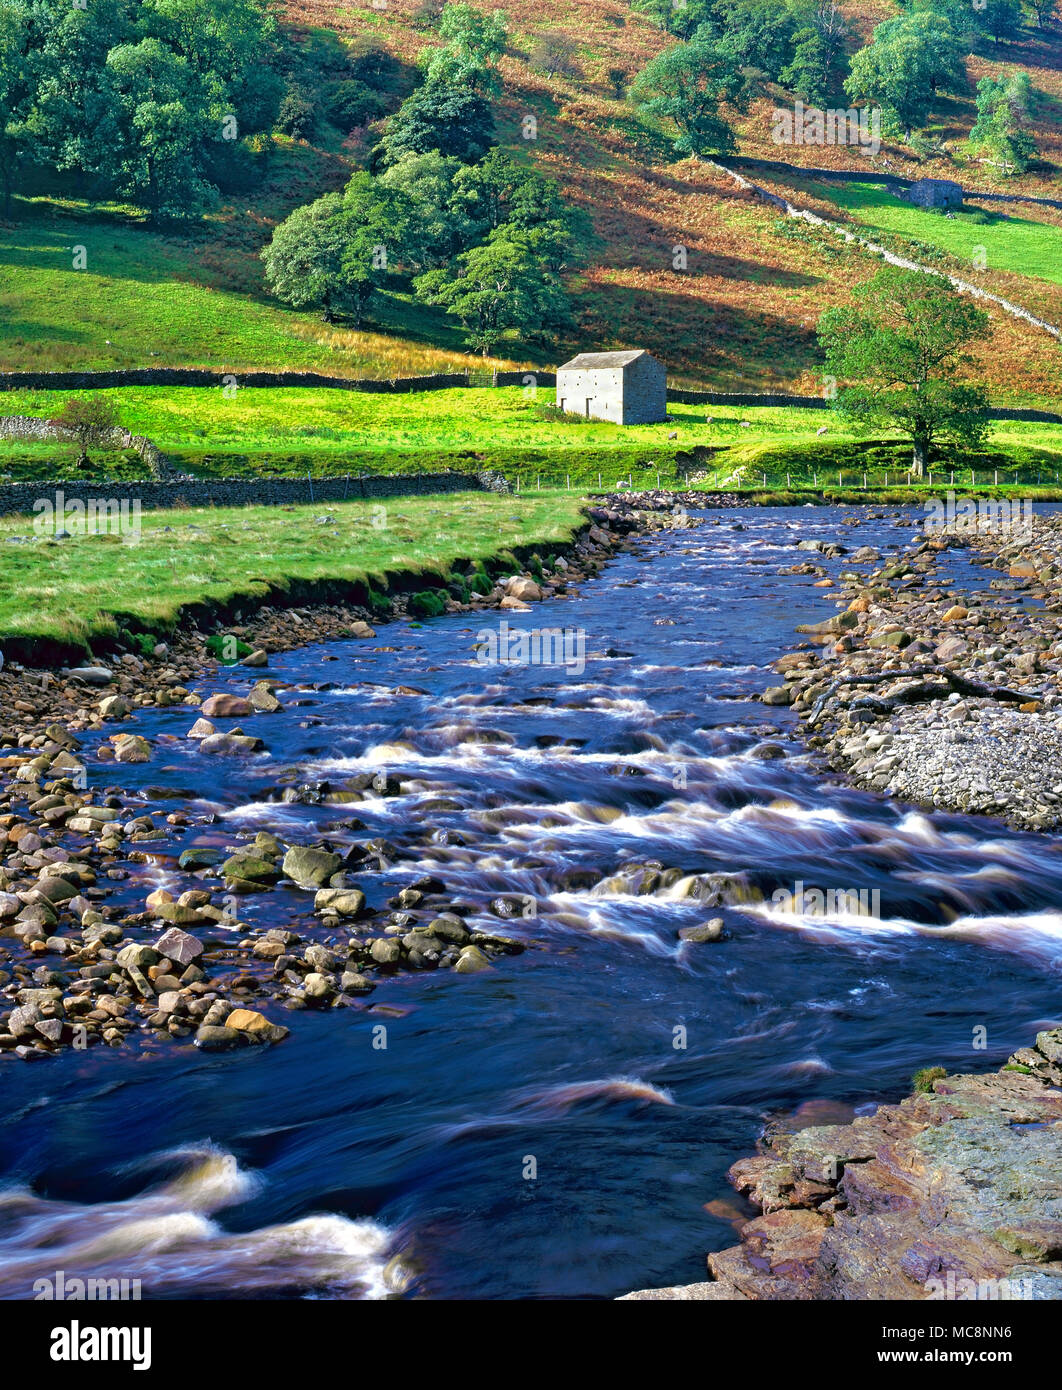 A summer view of the River Swale in the picturesque Yorkshire Dales, England. Stock Photo